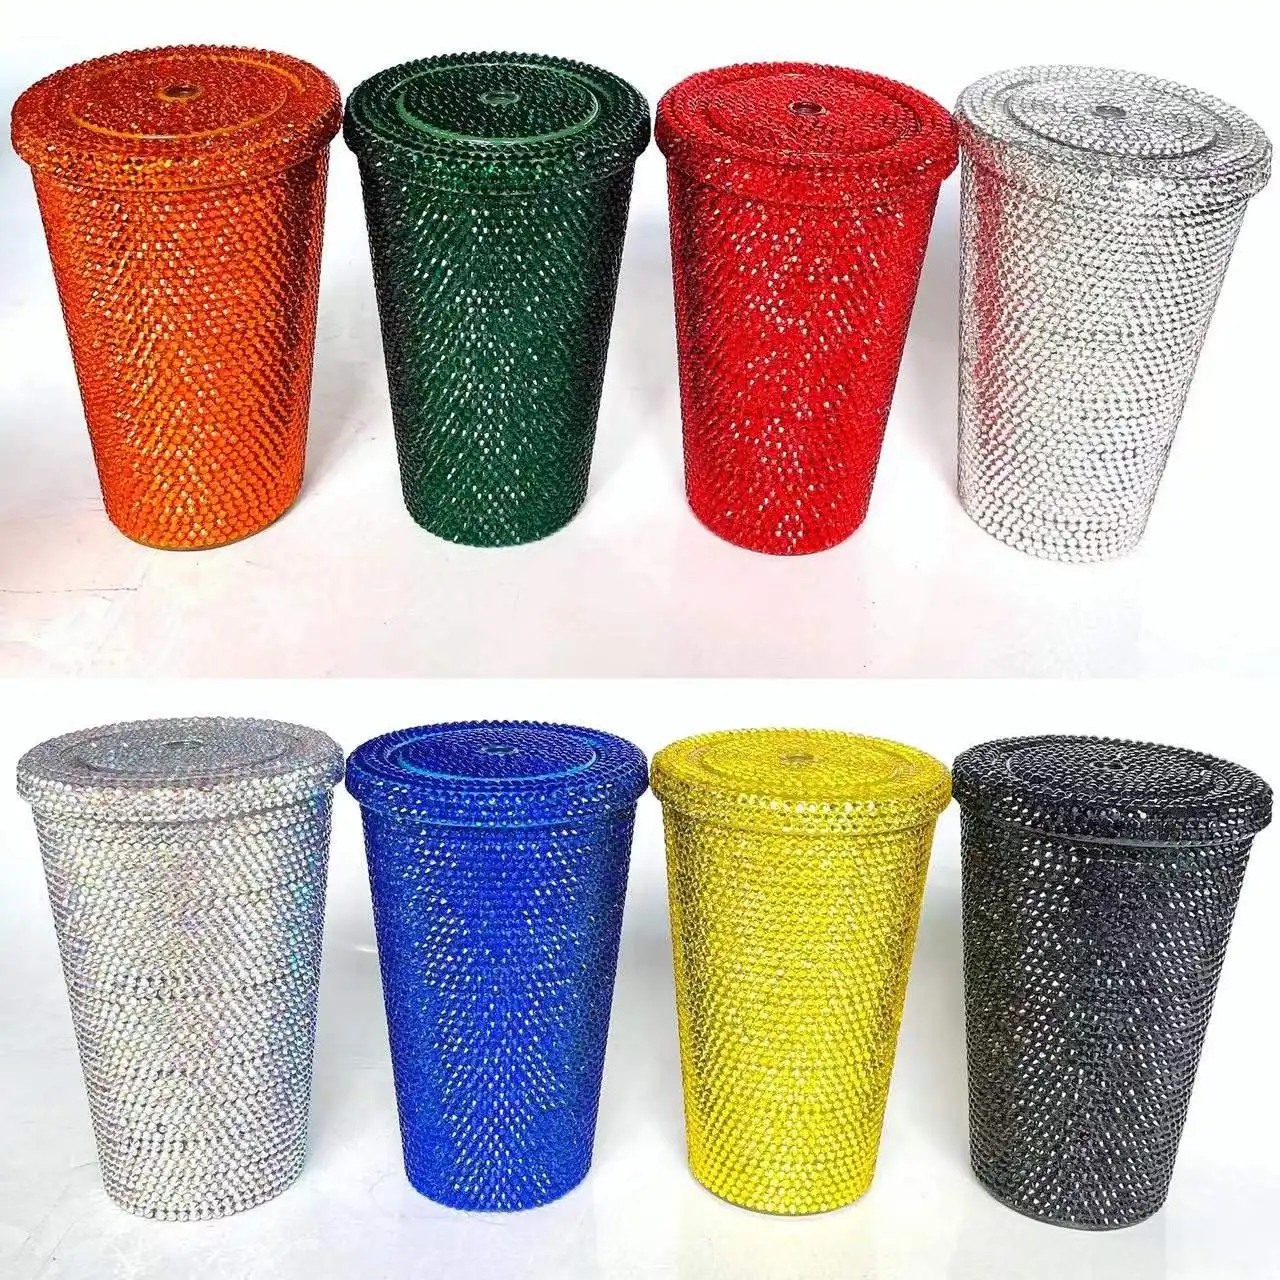 Colorful Ins Hot Selling Souvenir Bling Rhinestone Diamond Gem Colored Beverage Cup Bottle Oem Customer Design For Daily Life